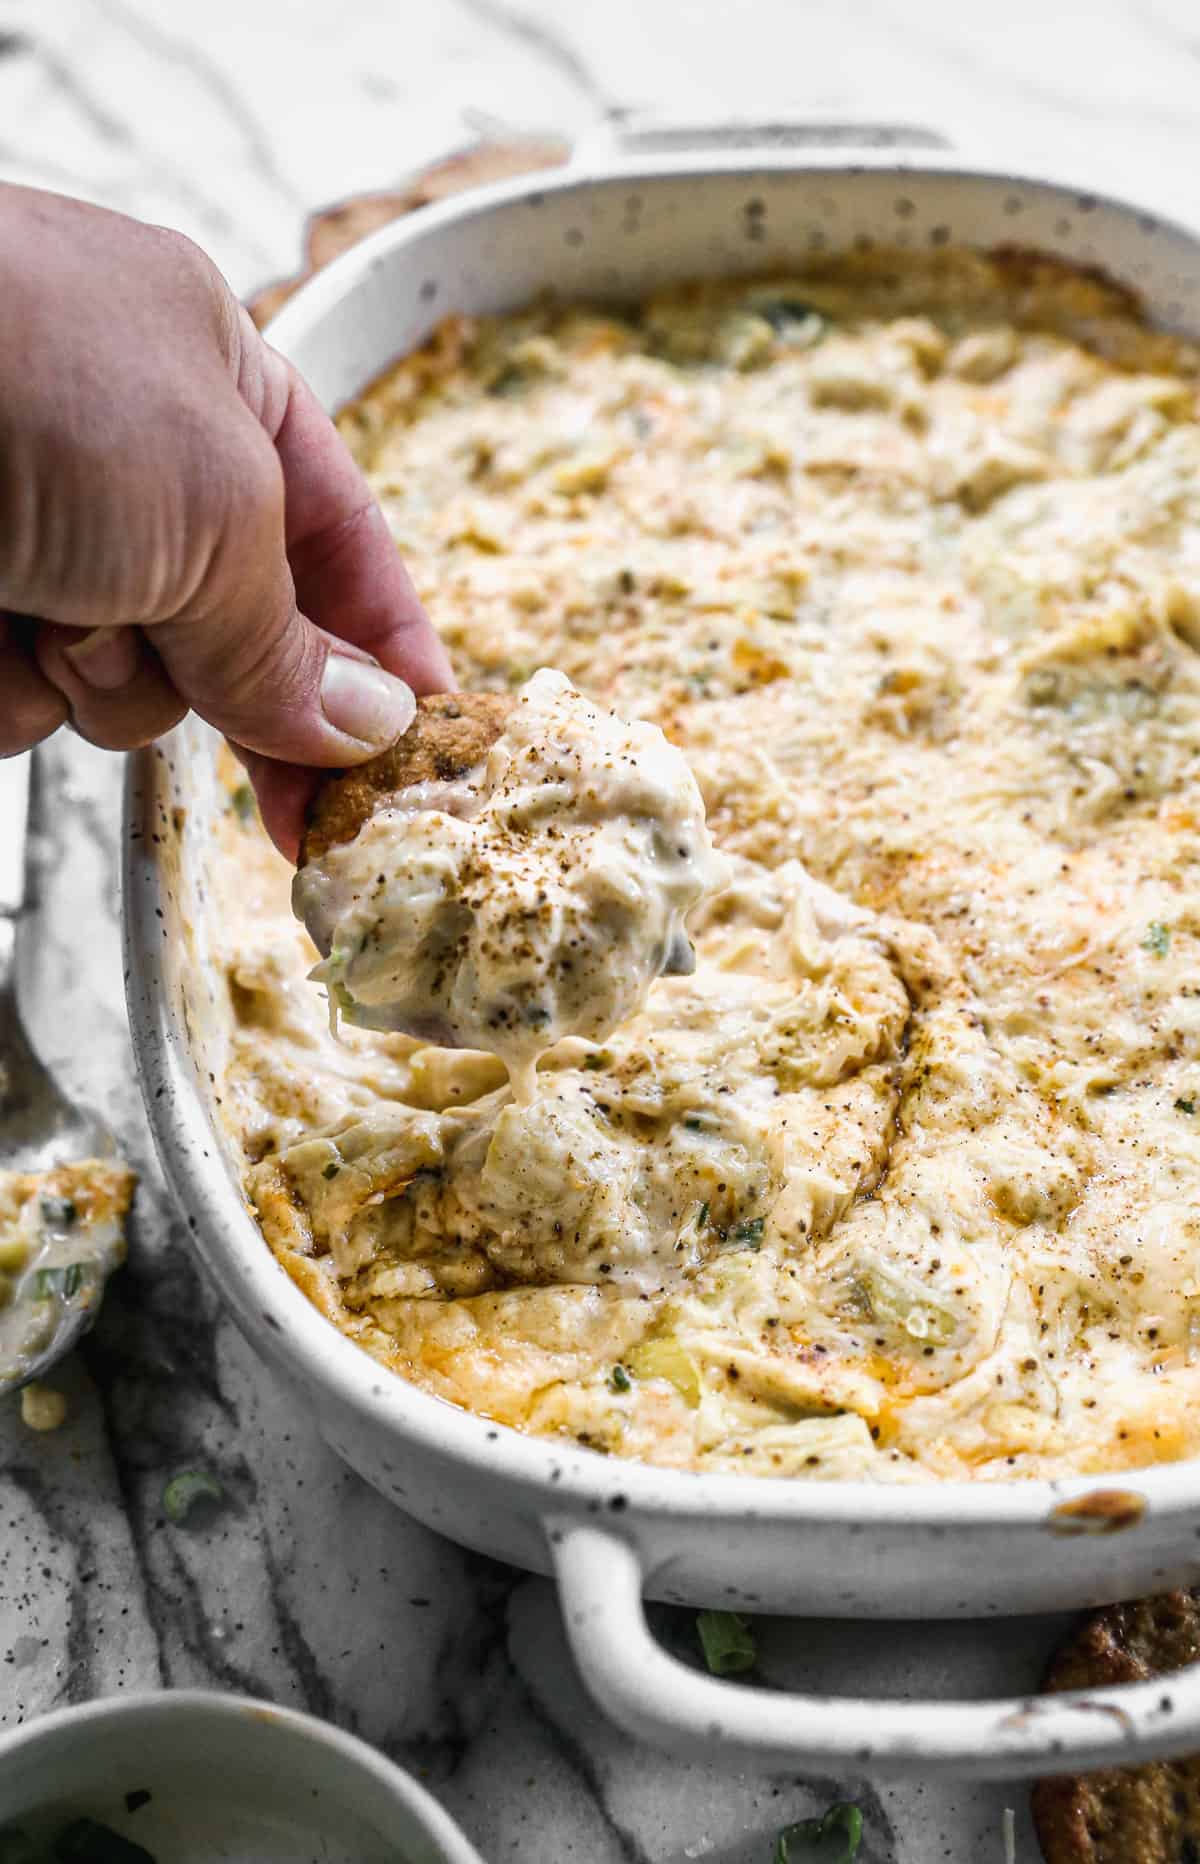 Someone scooping up homemade Crab Artichoke Dip on a cracker.